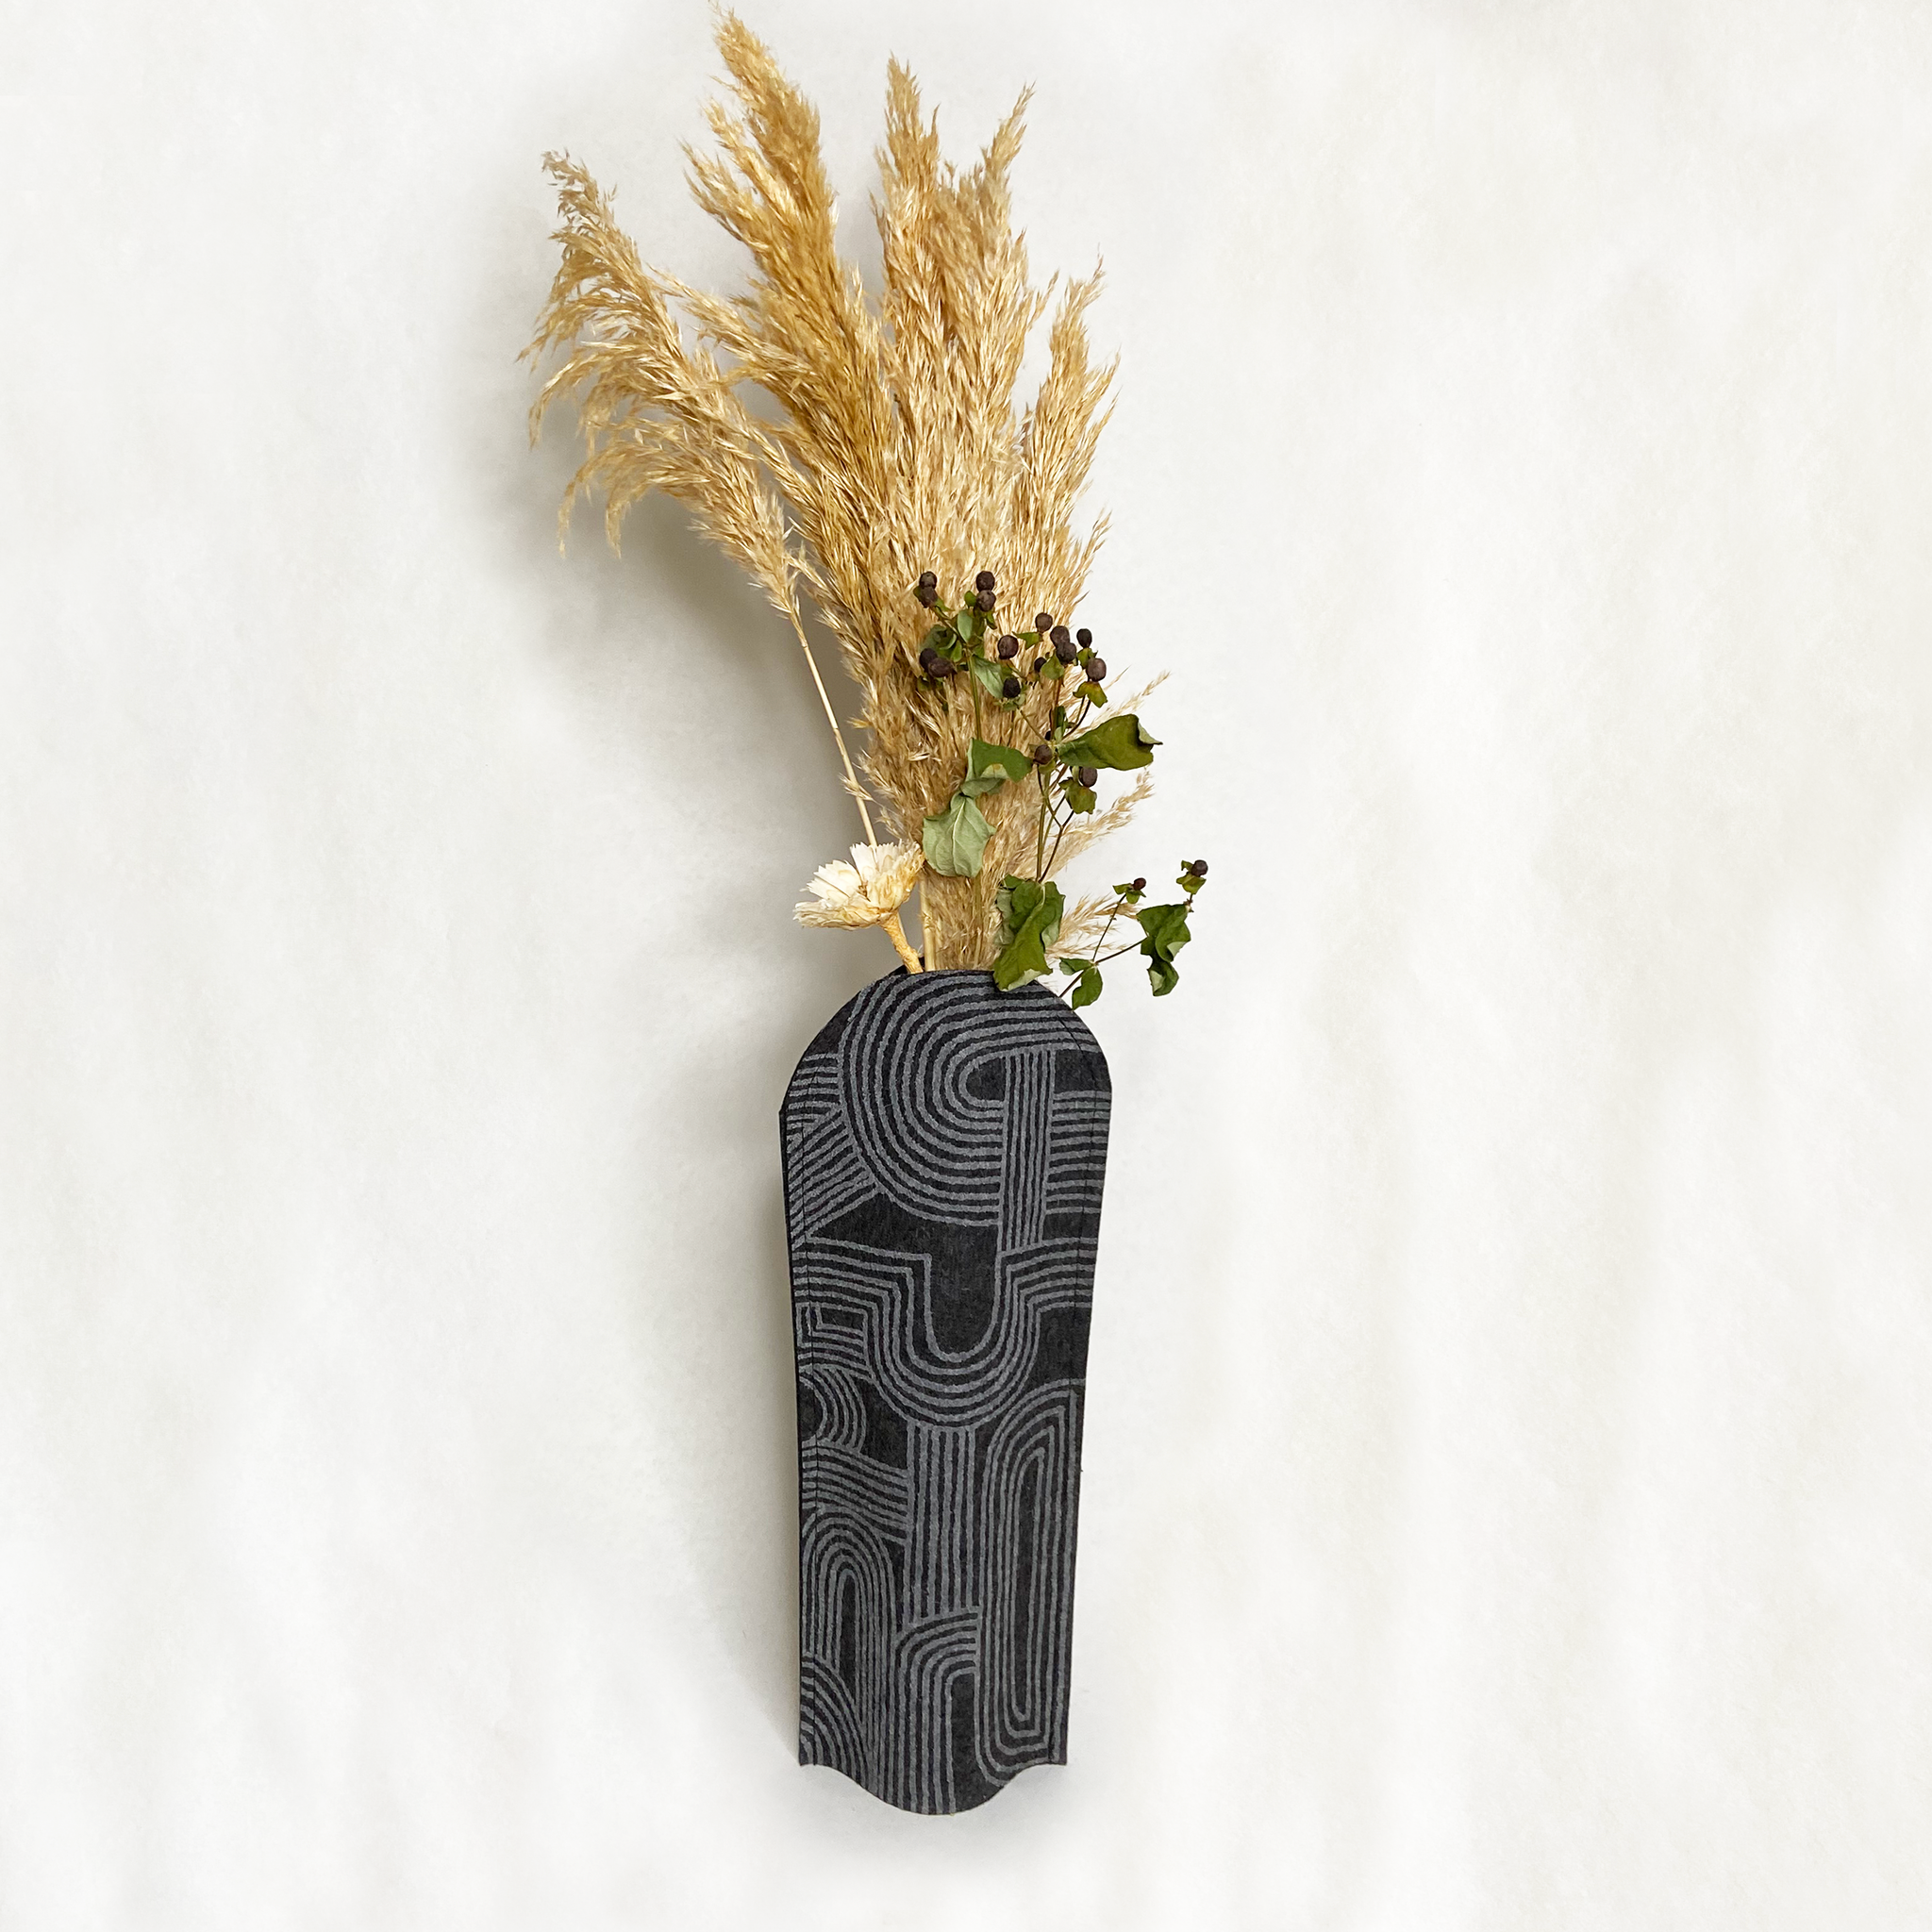 Felt vase sleeve. Handmade, eco-friendly, and sustainable decor. Upcycle recycling through a flexible designed vase cover. 